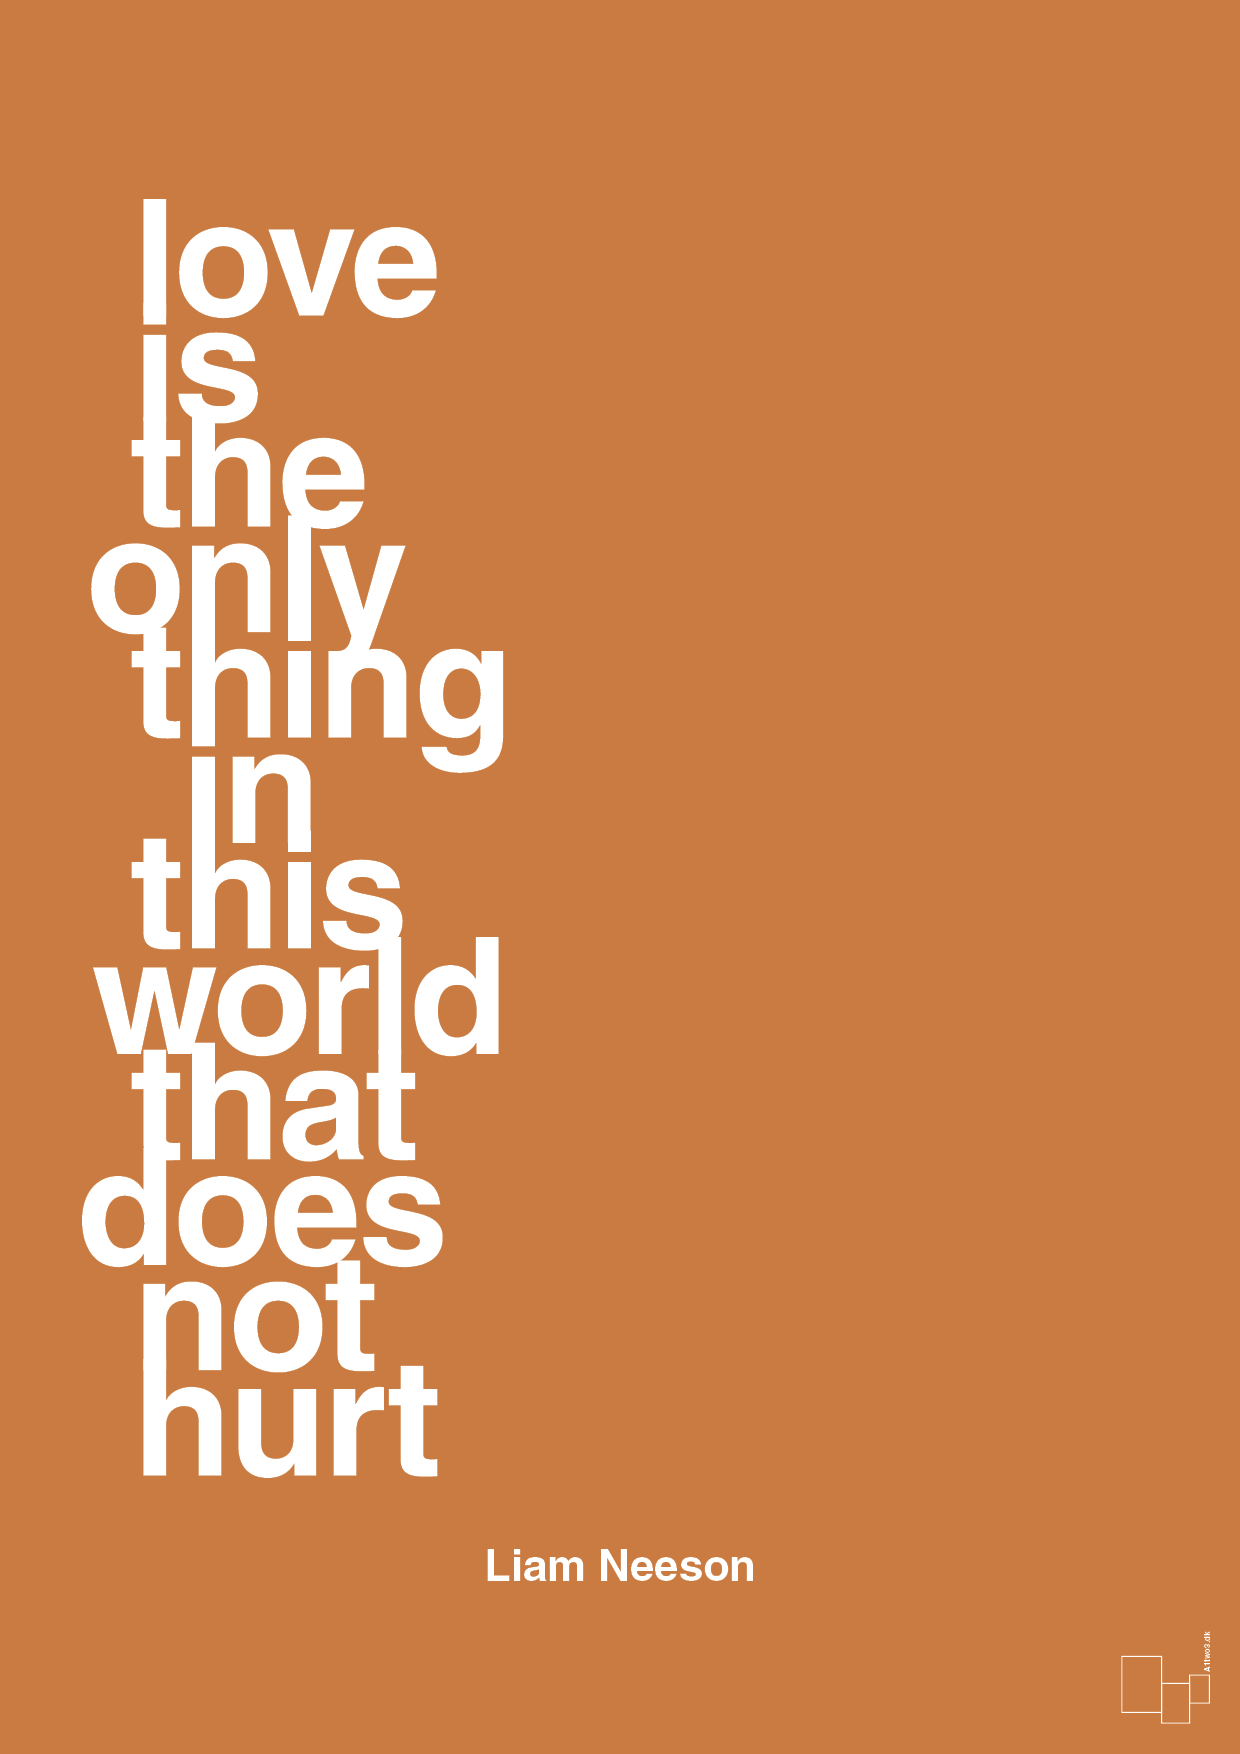 love is the only thing in this world that does not hurt - Plakat med Citater i Rumba Orange